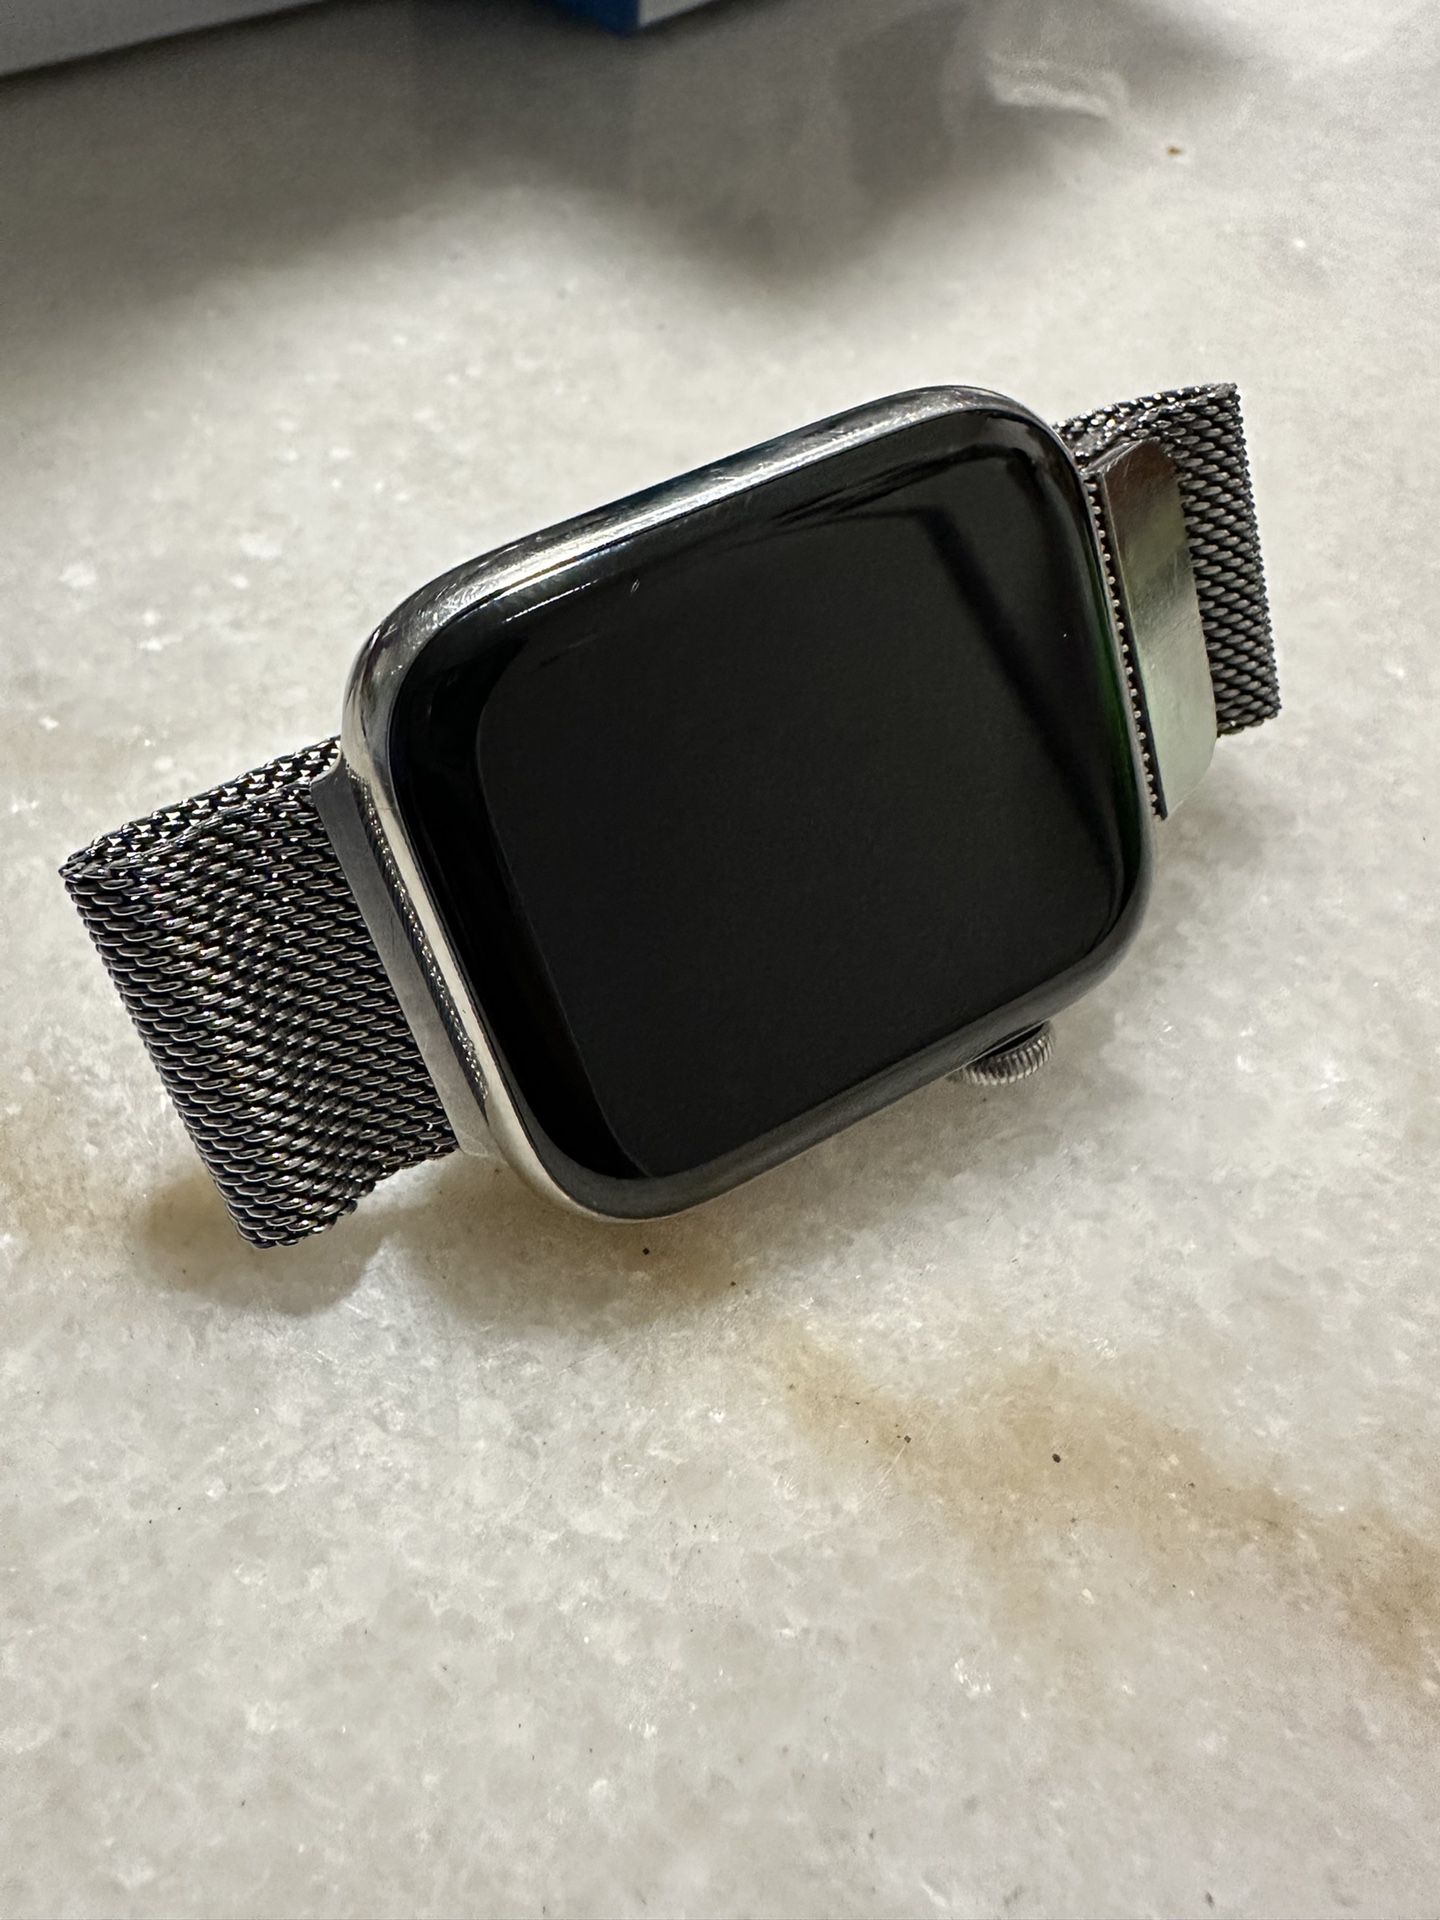 Apple Watch stainless steel!